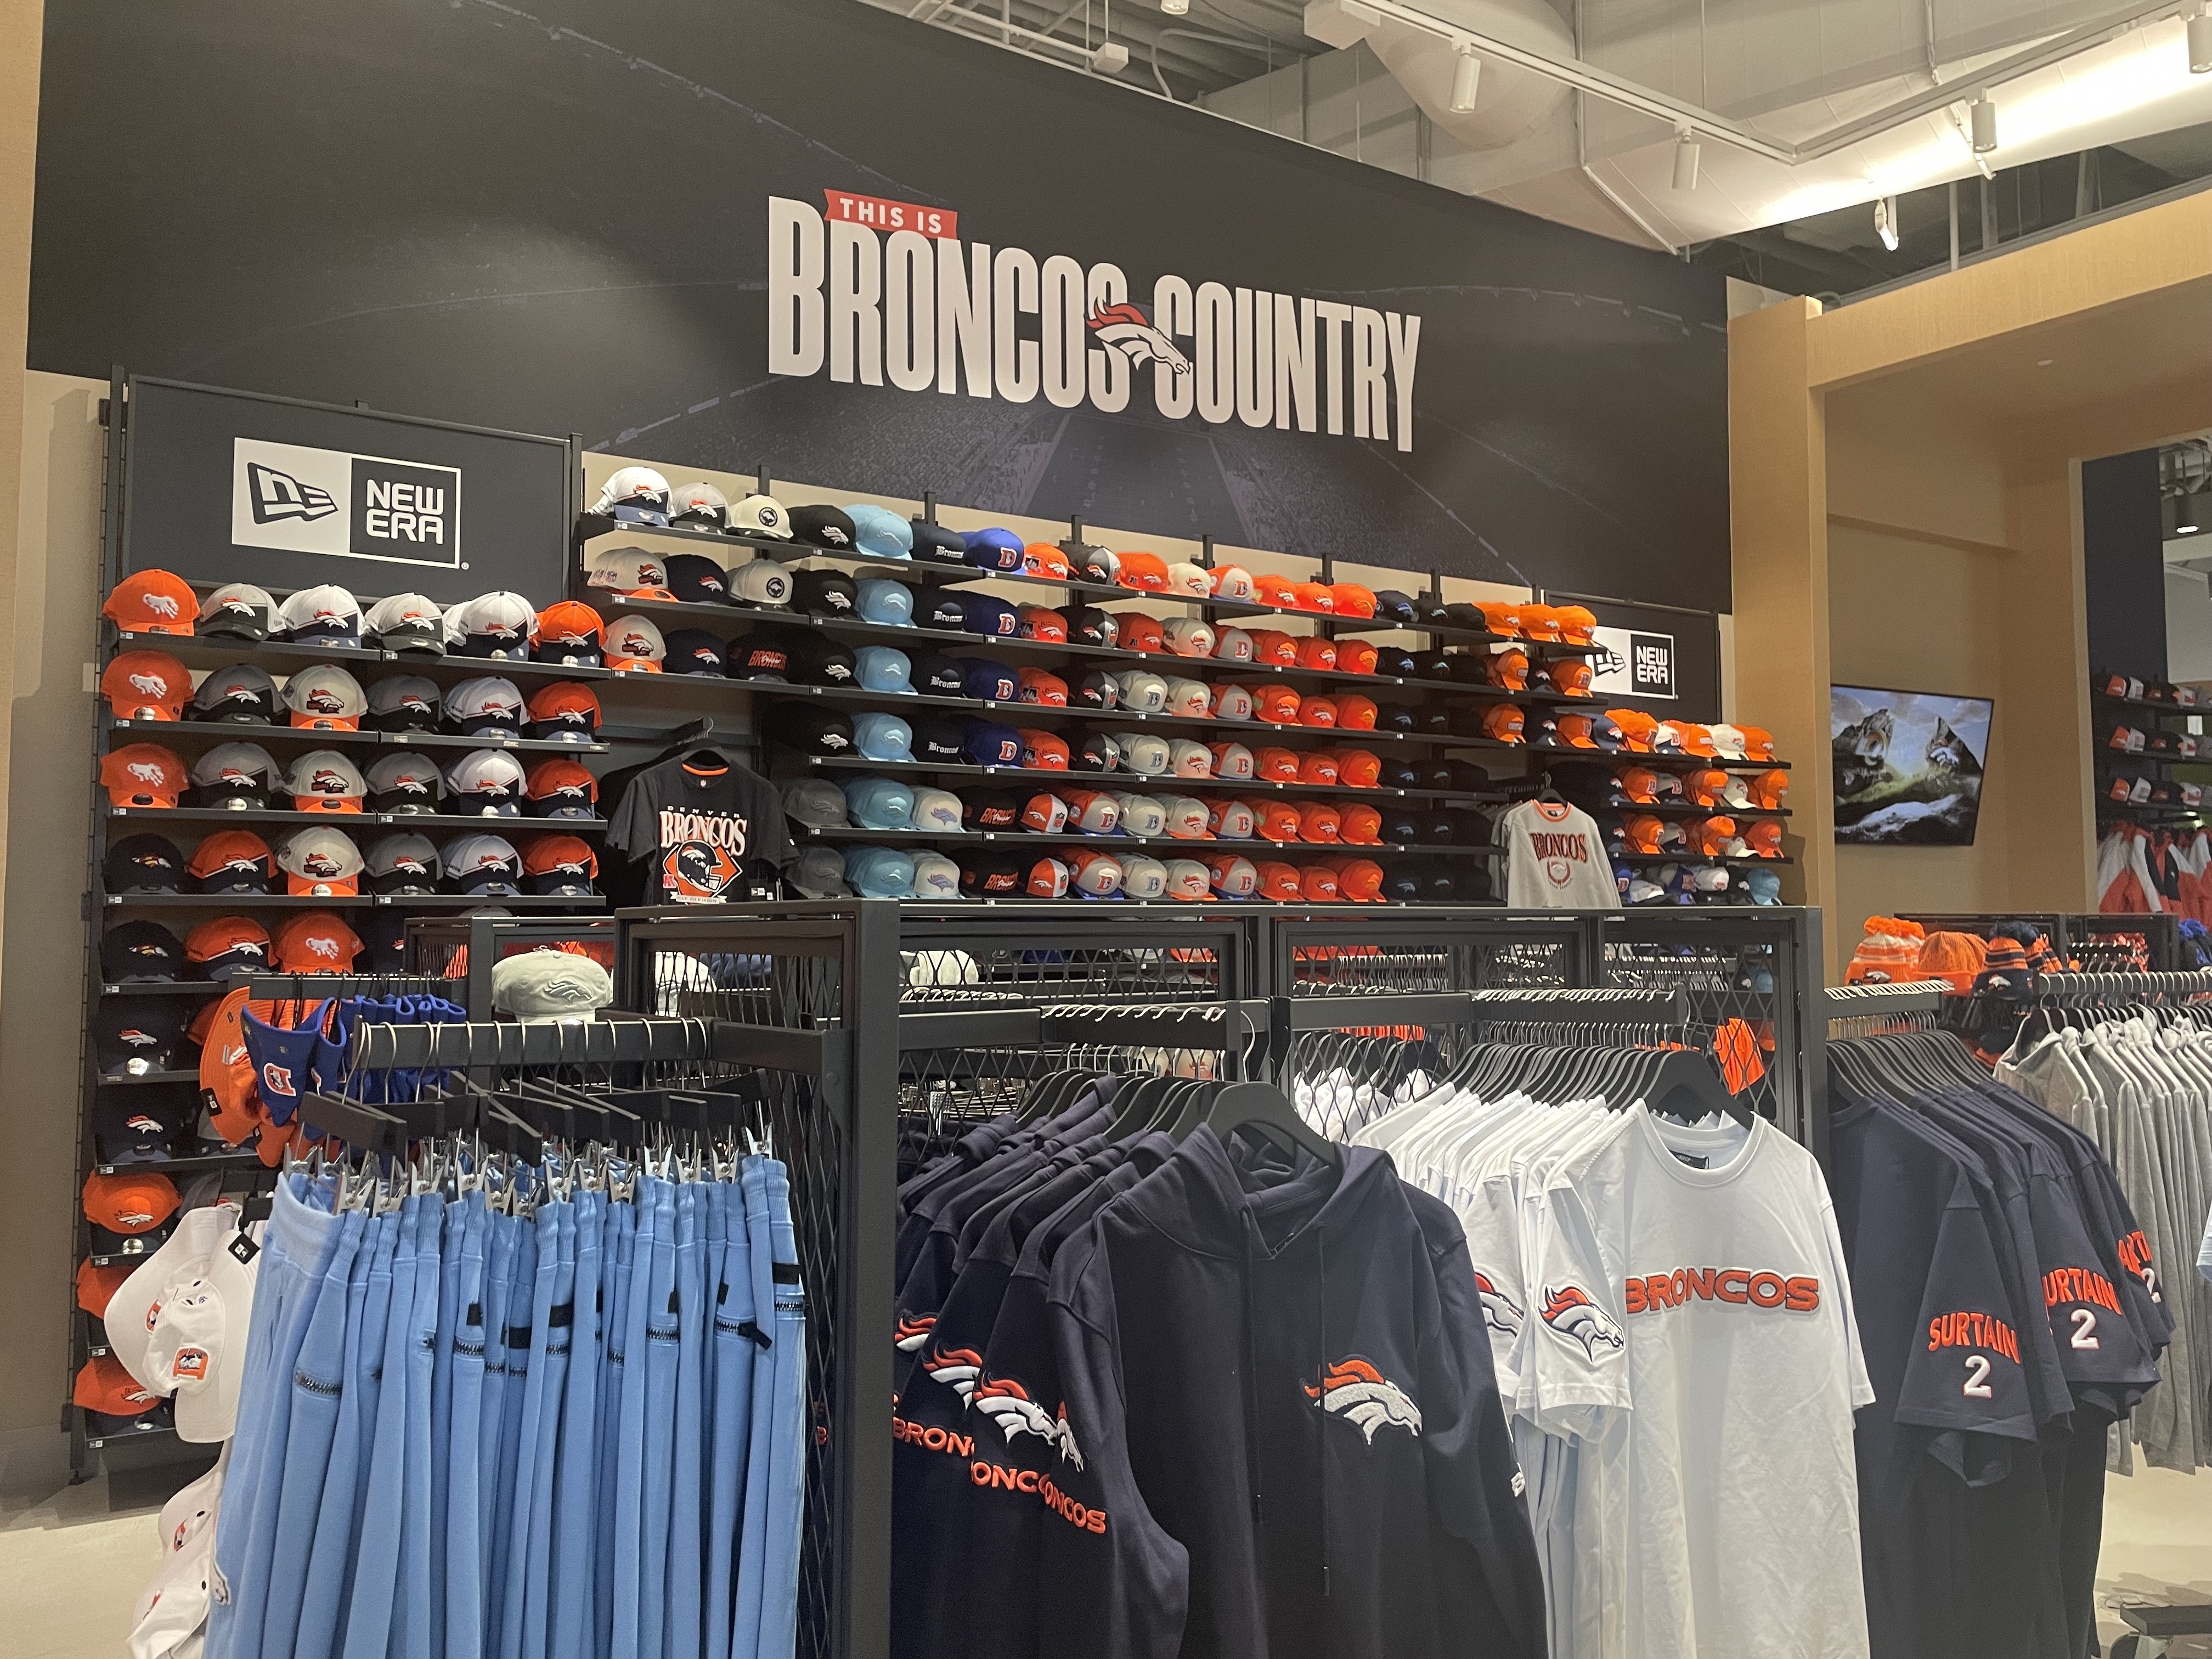 broncos team store at mile high